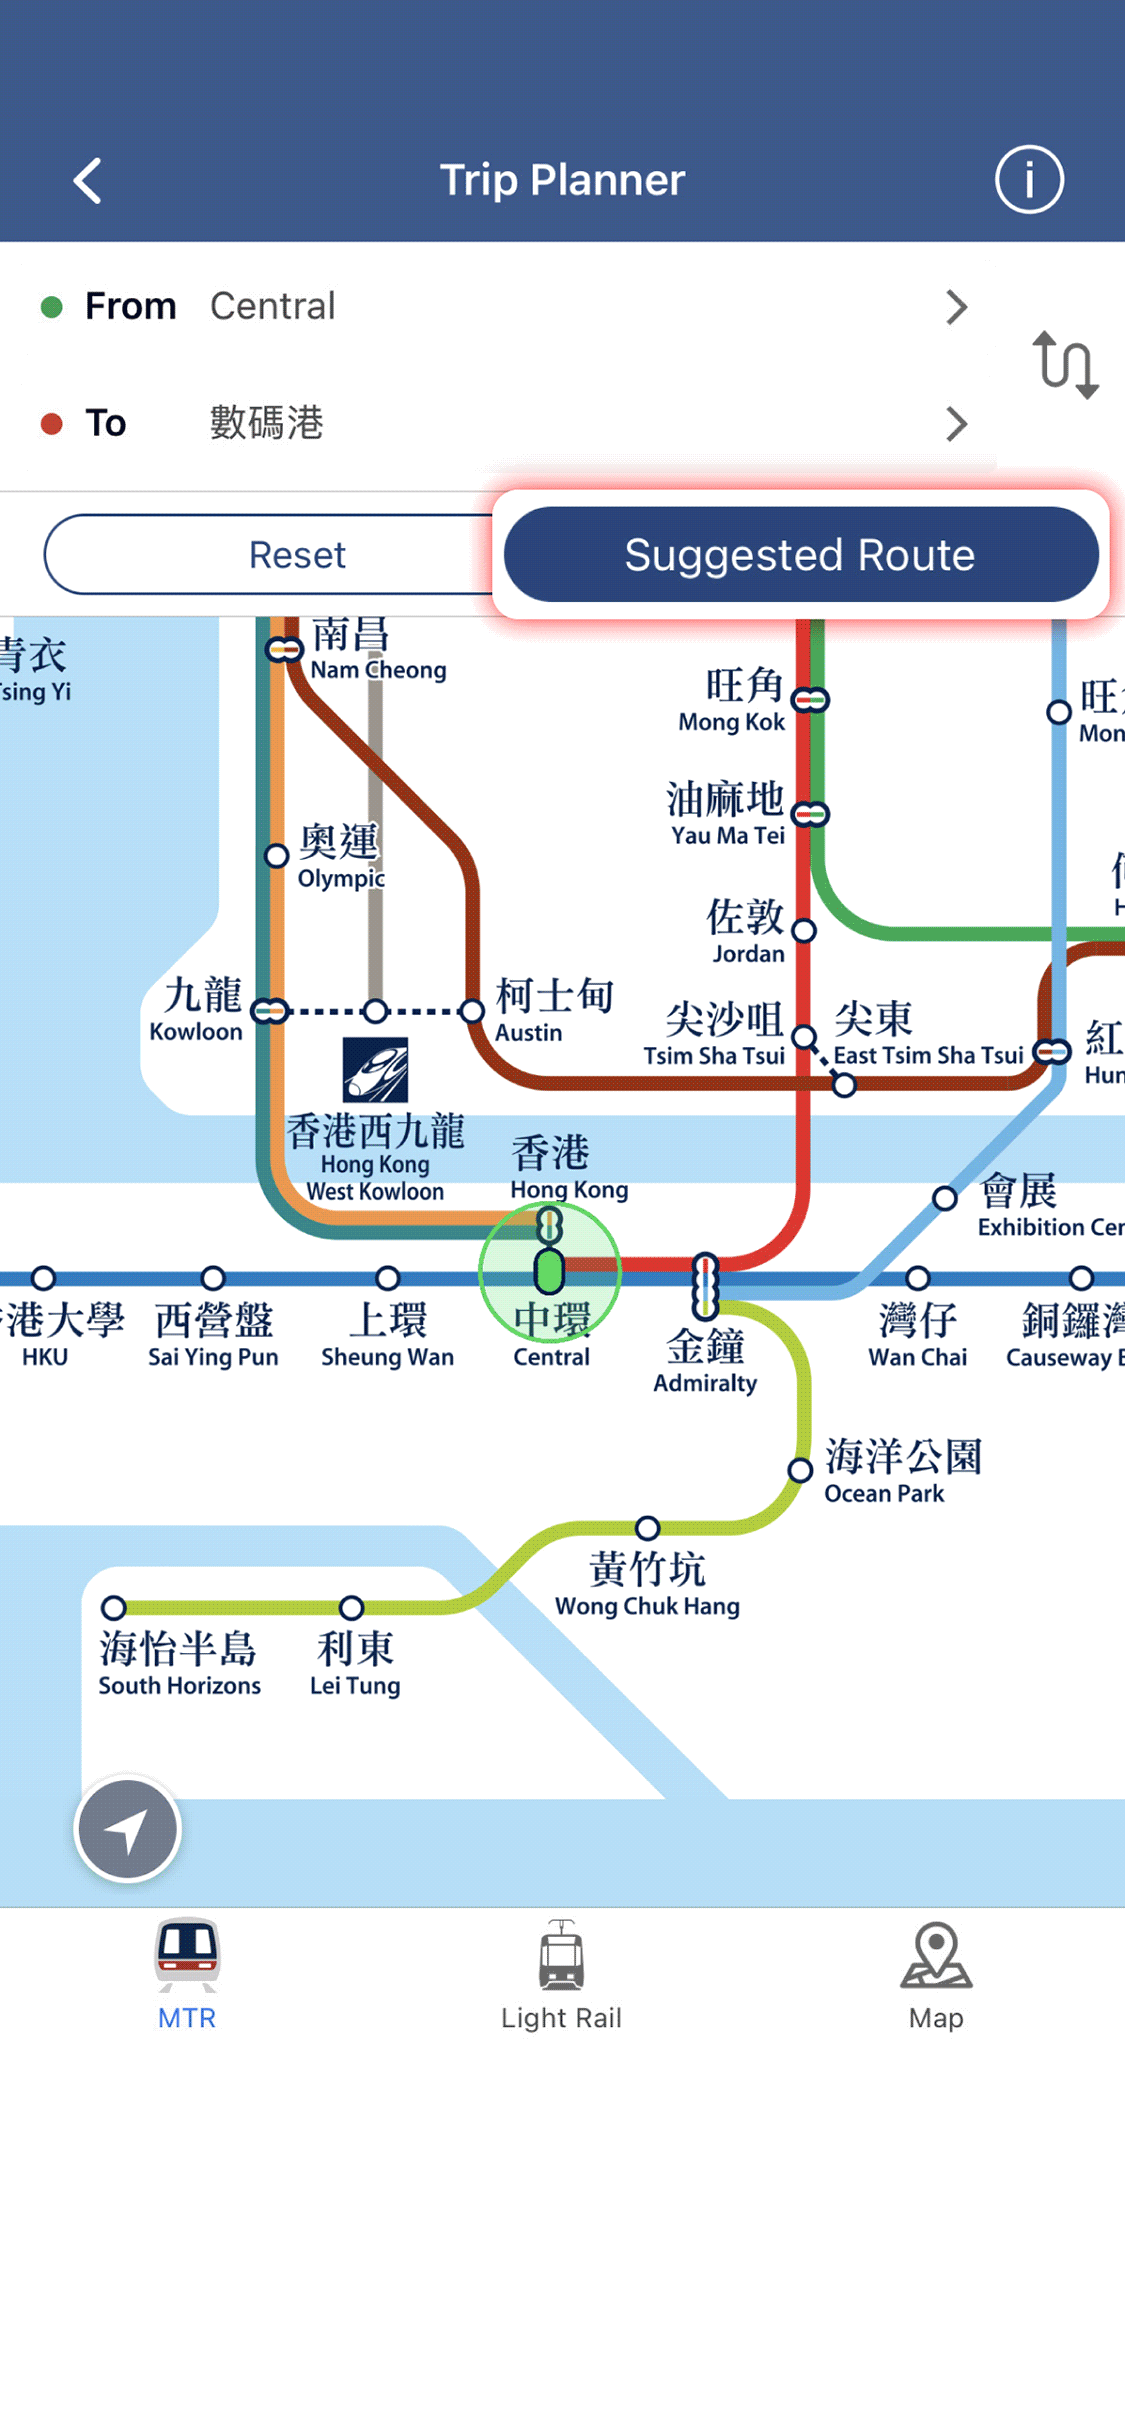 Simply input or choose your origin and destination station on the MTR system map, and tap 'Suggested Route'